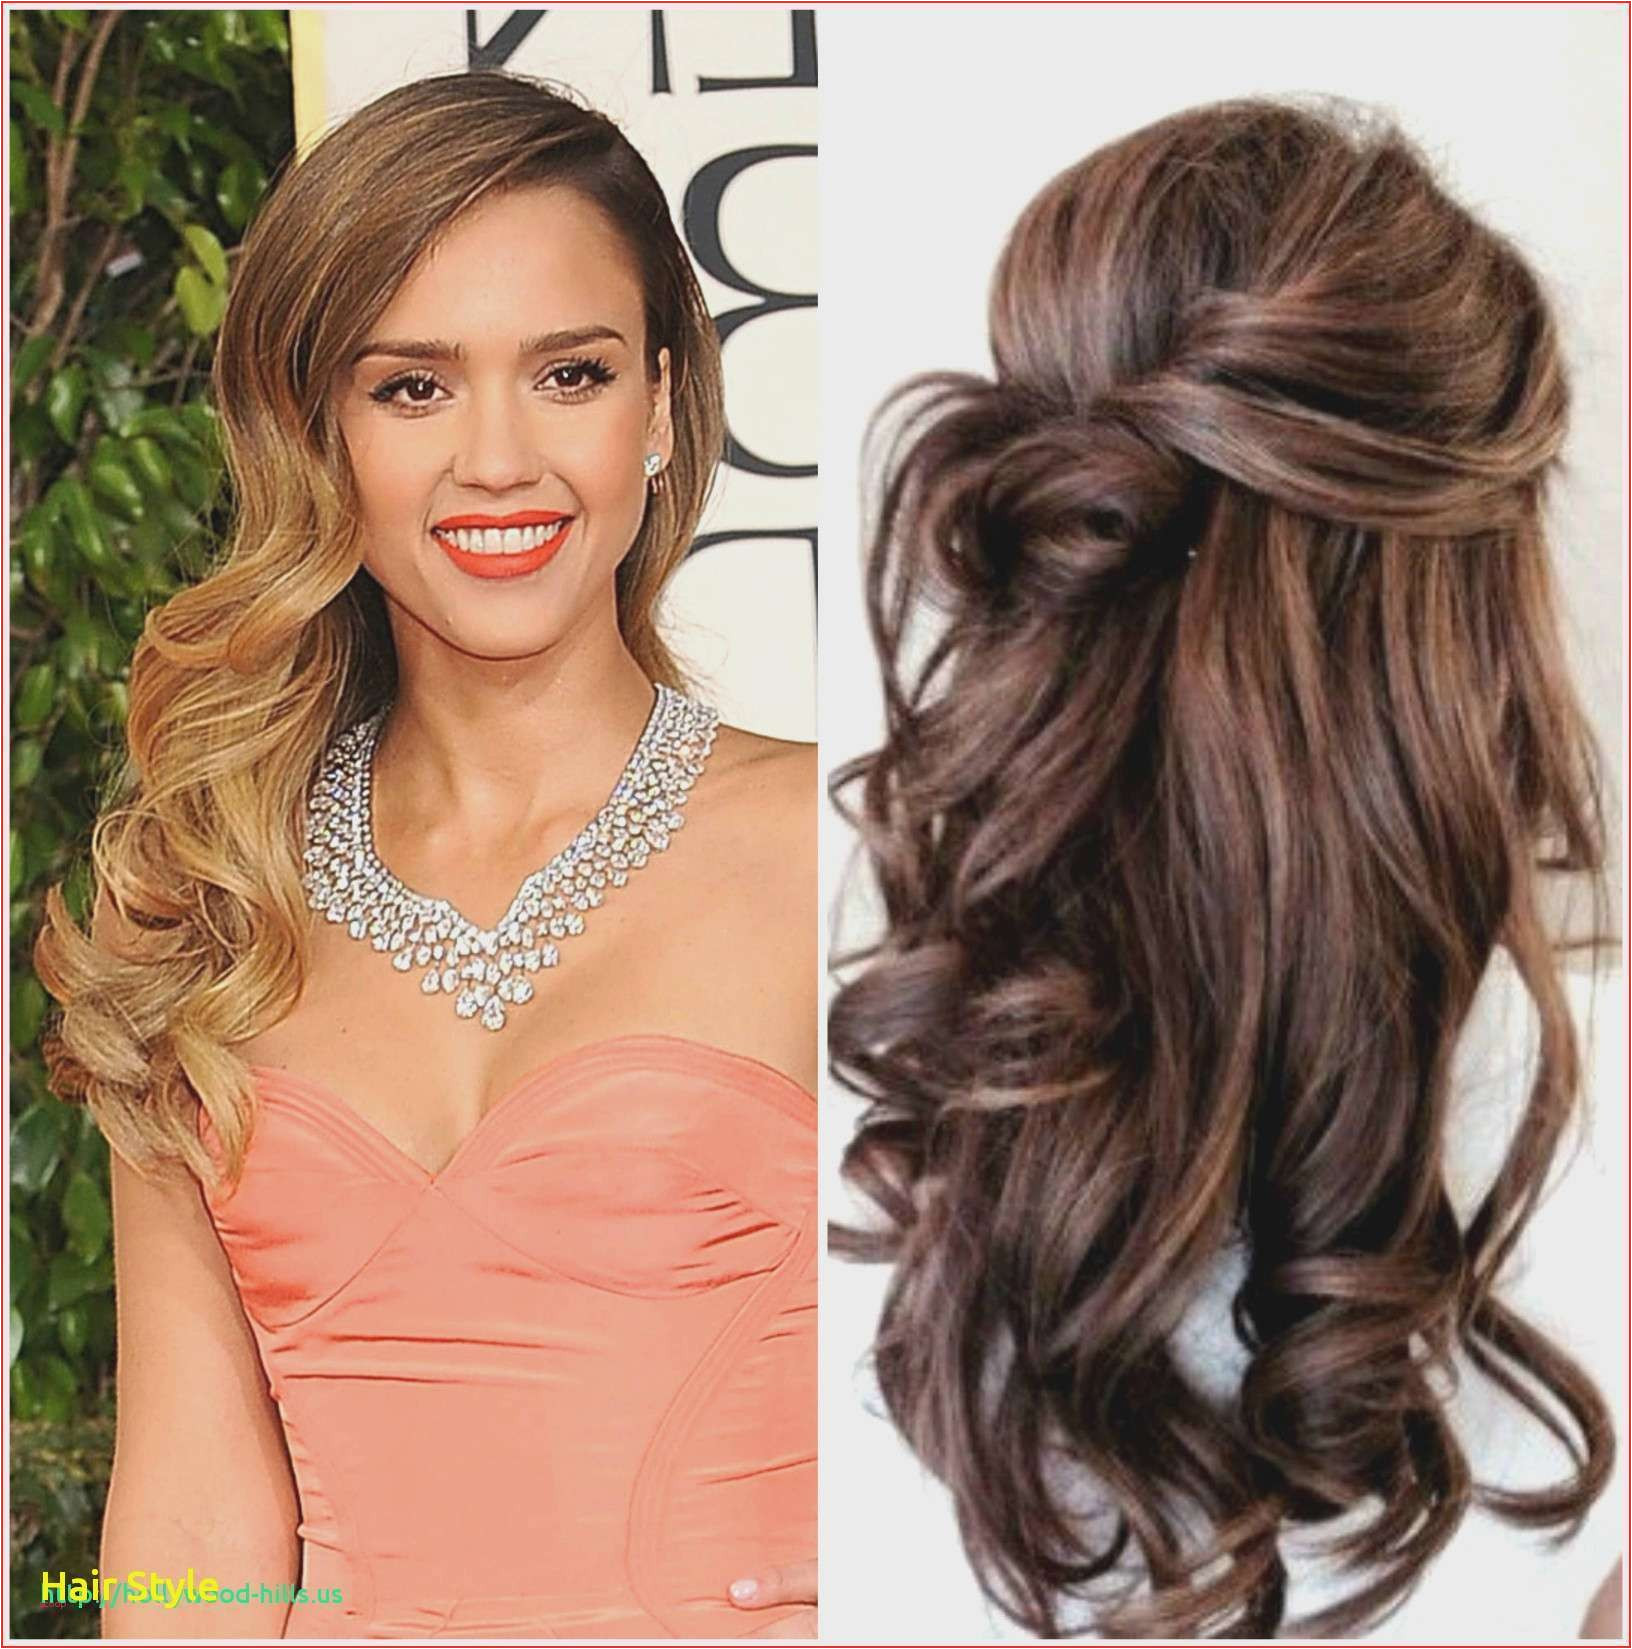 Auburn Hair asian Inspirational Updo Long Hair Hairstyle In 2018 Bridal Hair Style as to